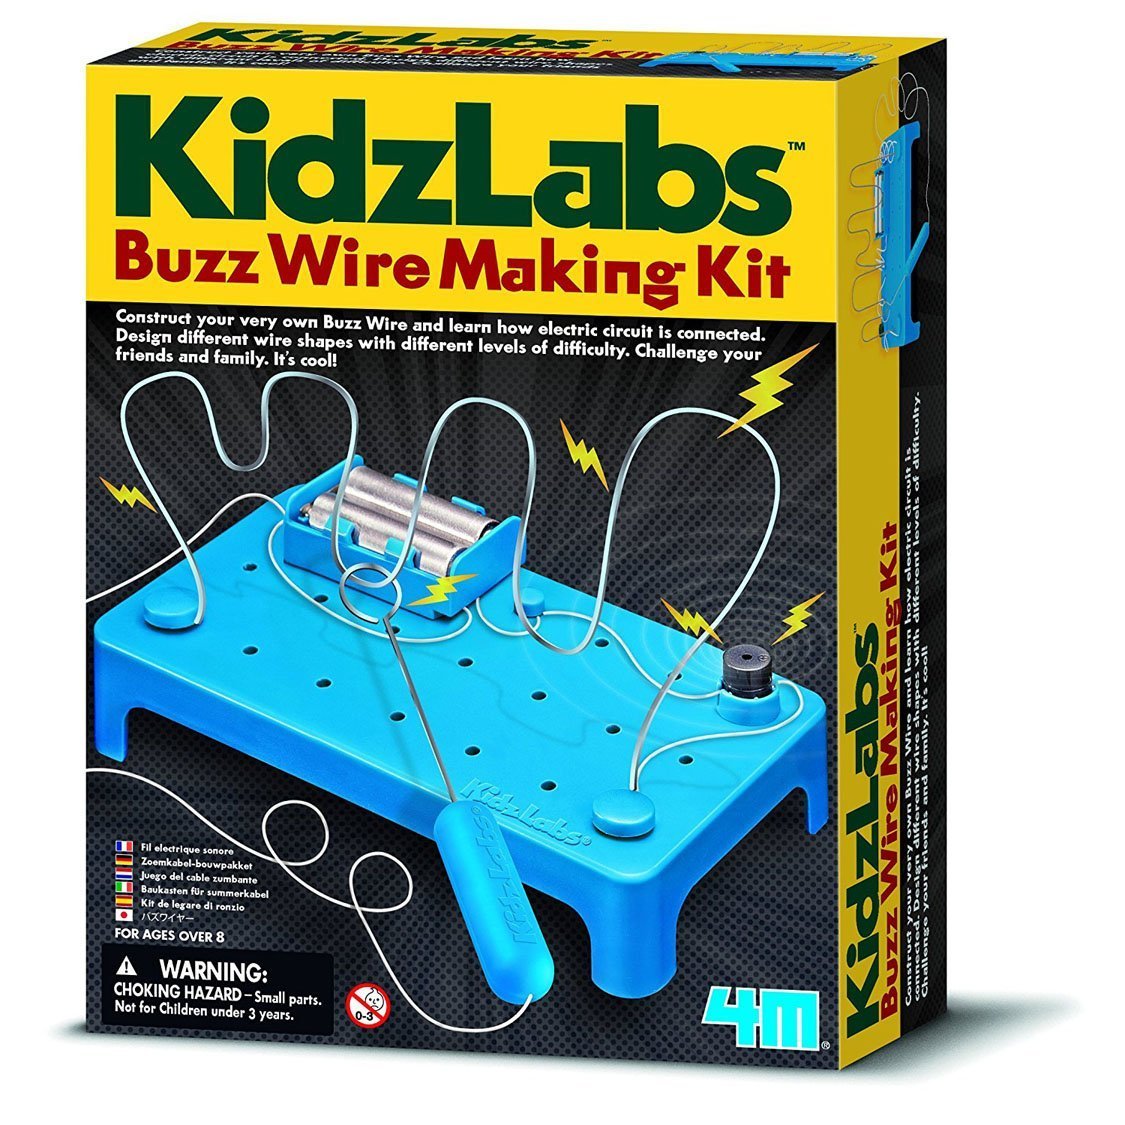 BUZZ WIRE MAKING KIT - Gifts R Us